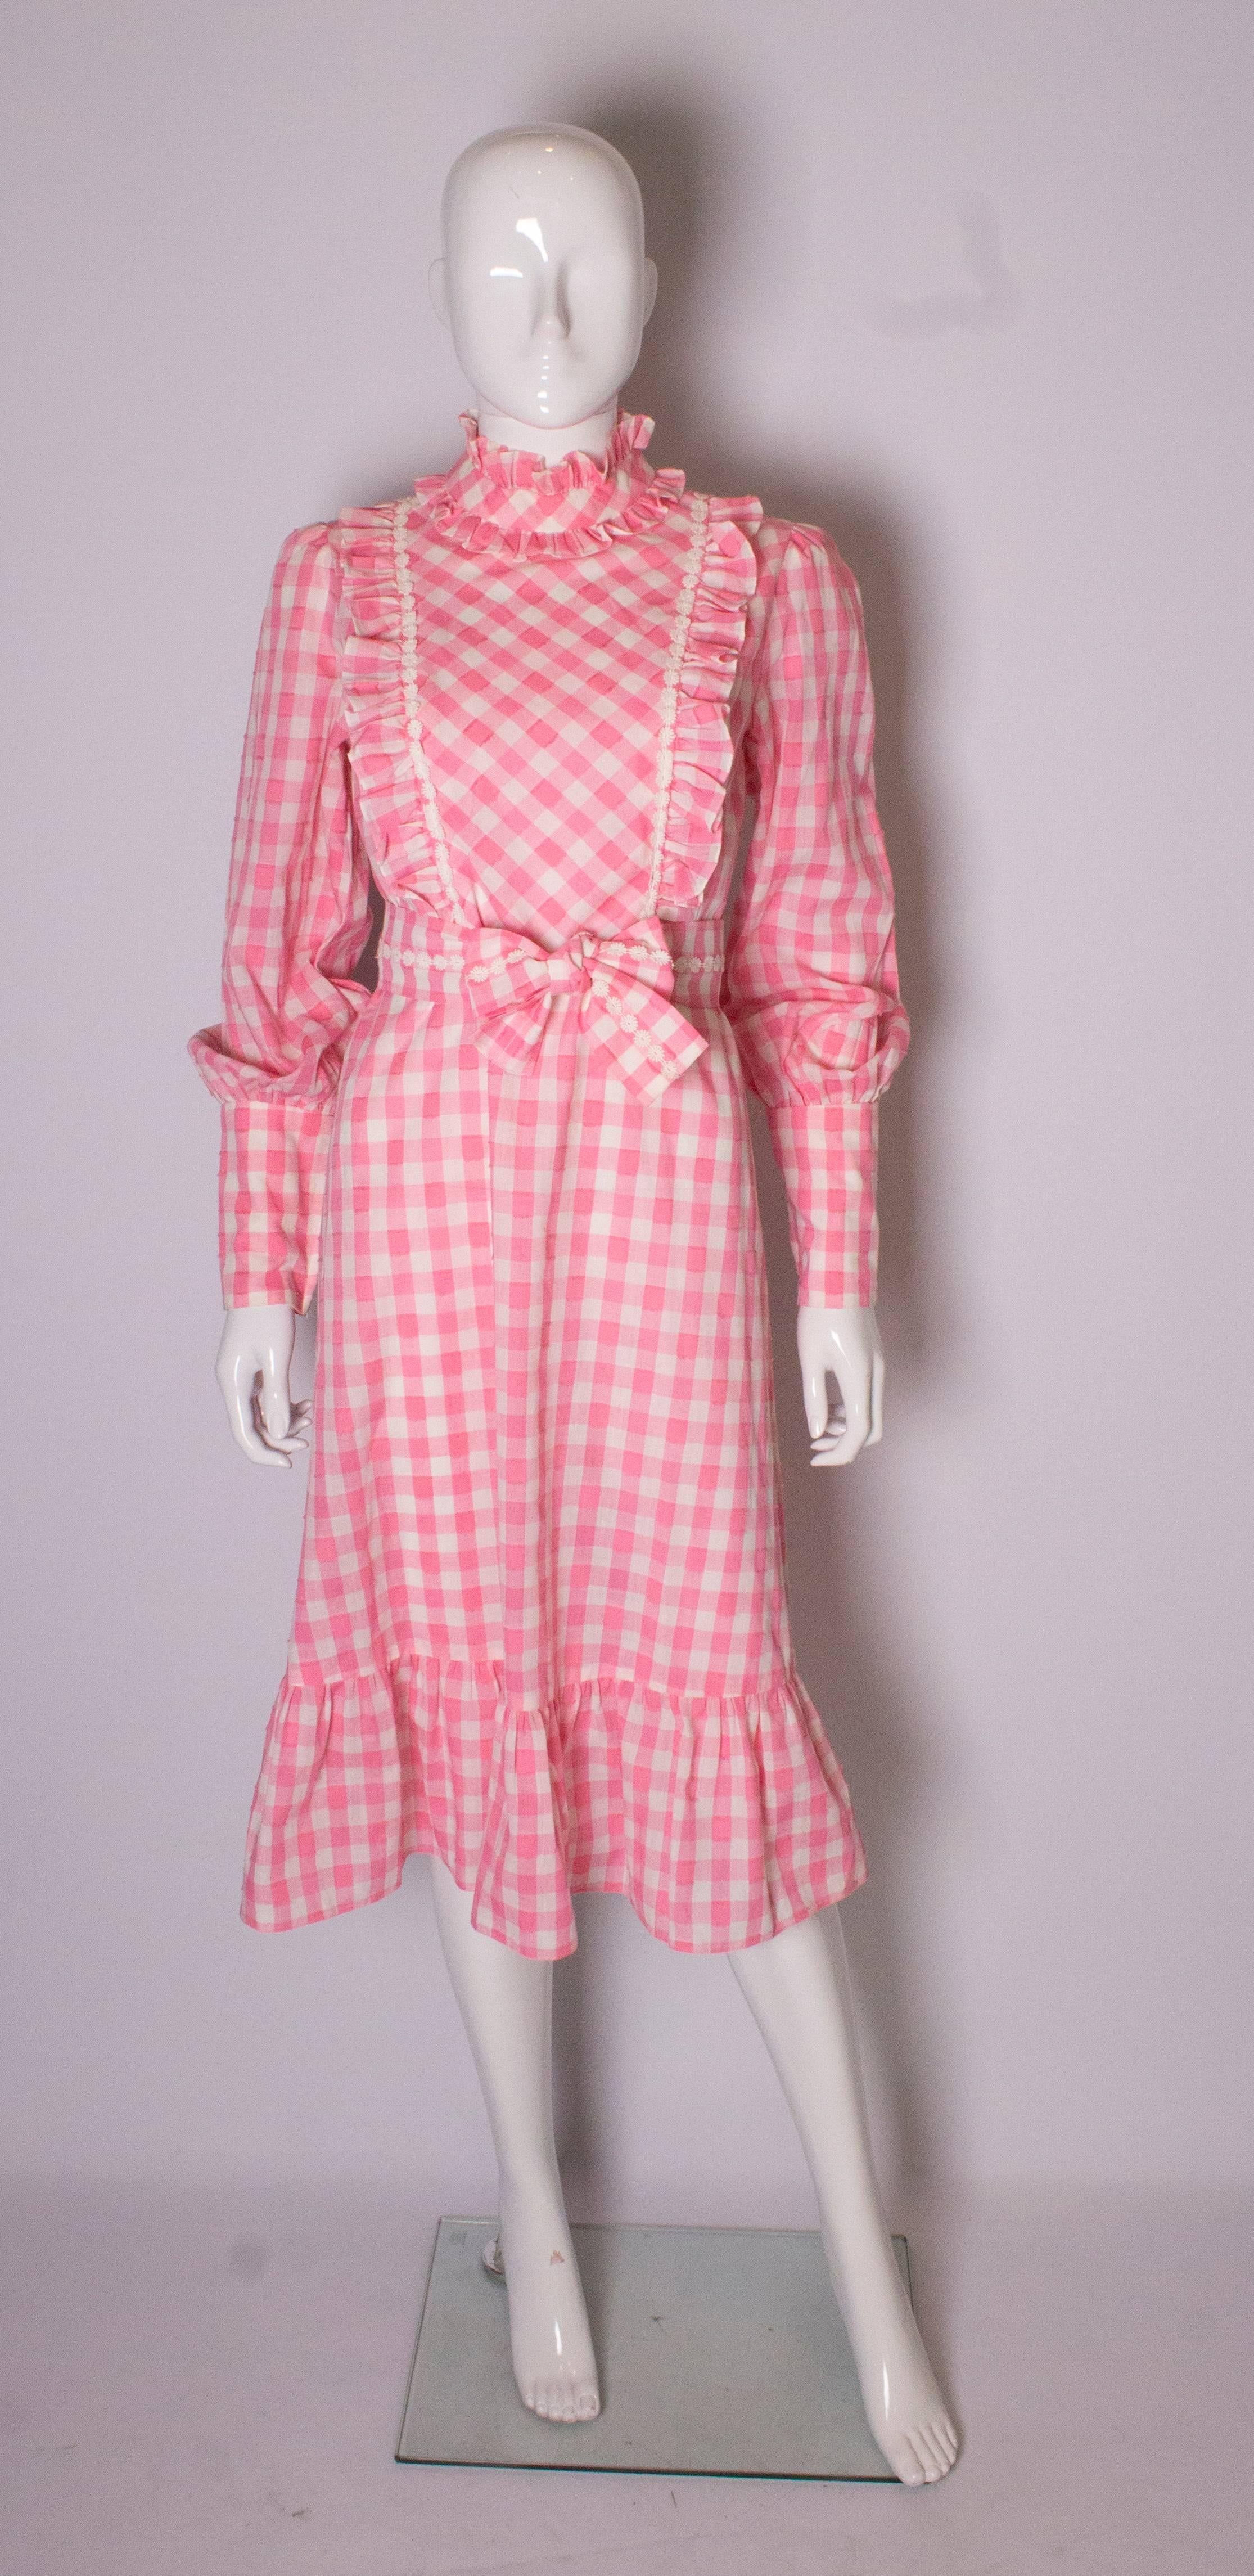 A fun dress for Spring, by British designer Susan Small.. The dress is made of a pink and white check fabric, with some texture detail on the pink squares.It has a stand up collar with two rows of frills, and a yoke with white flower detail and